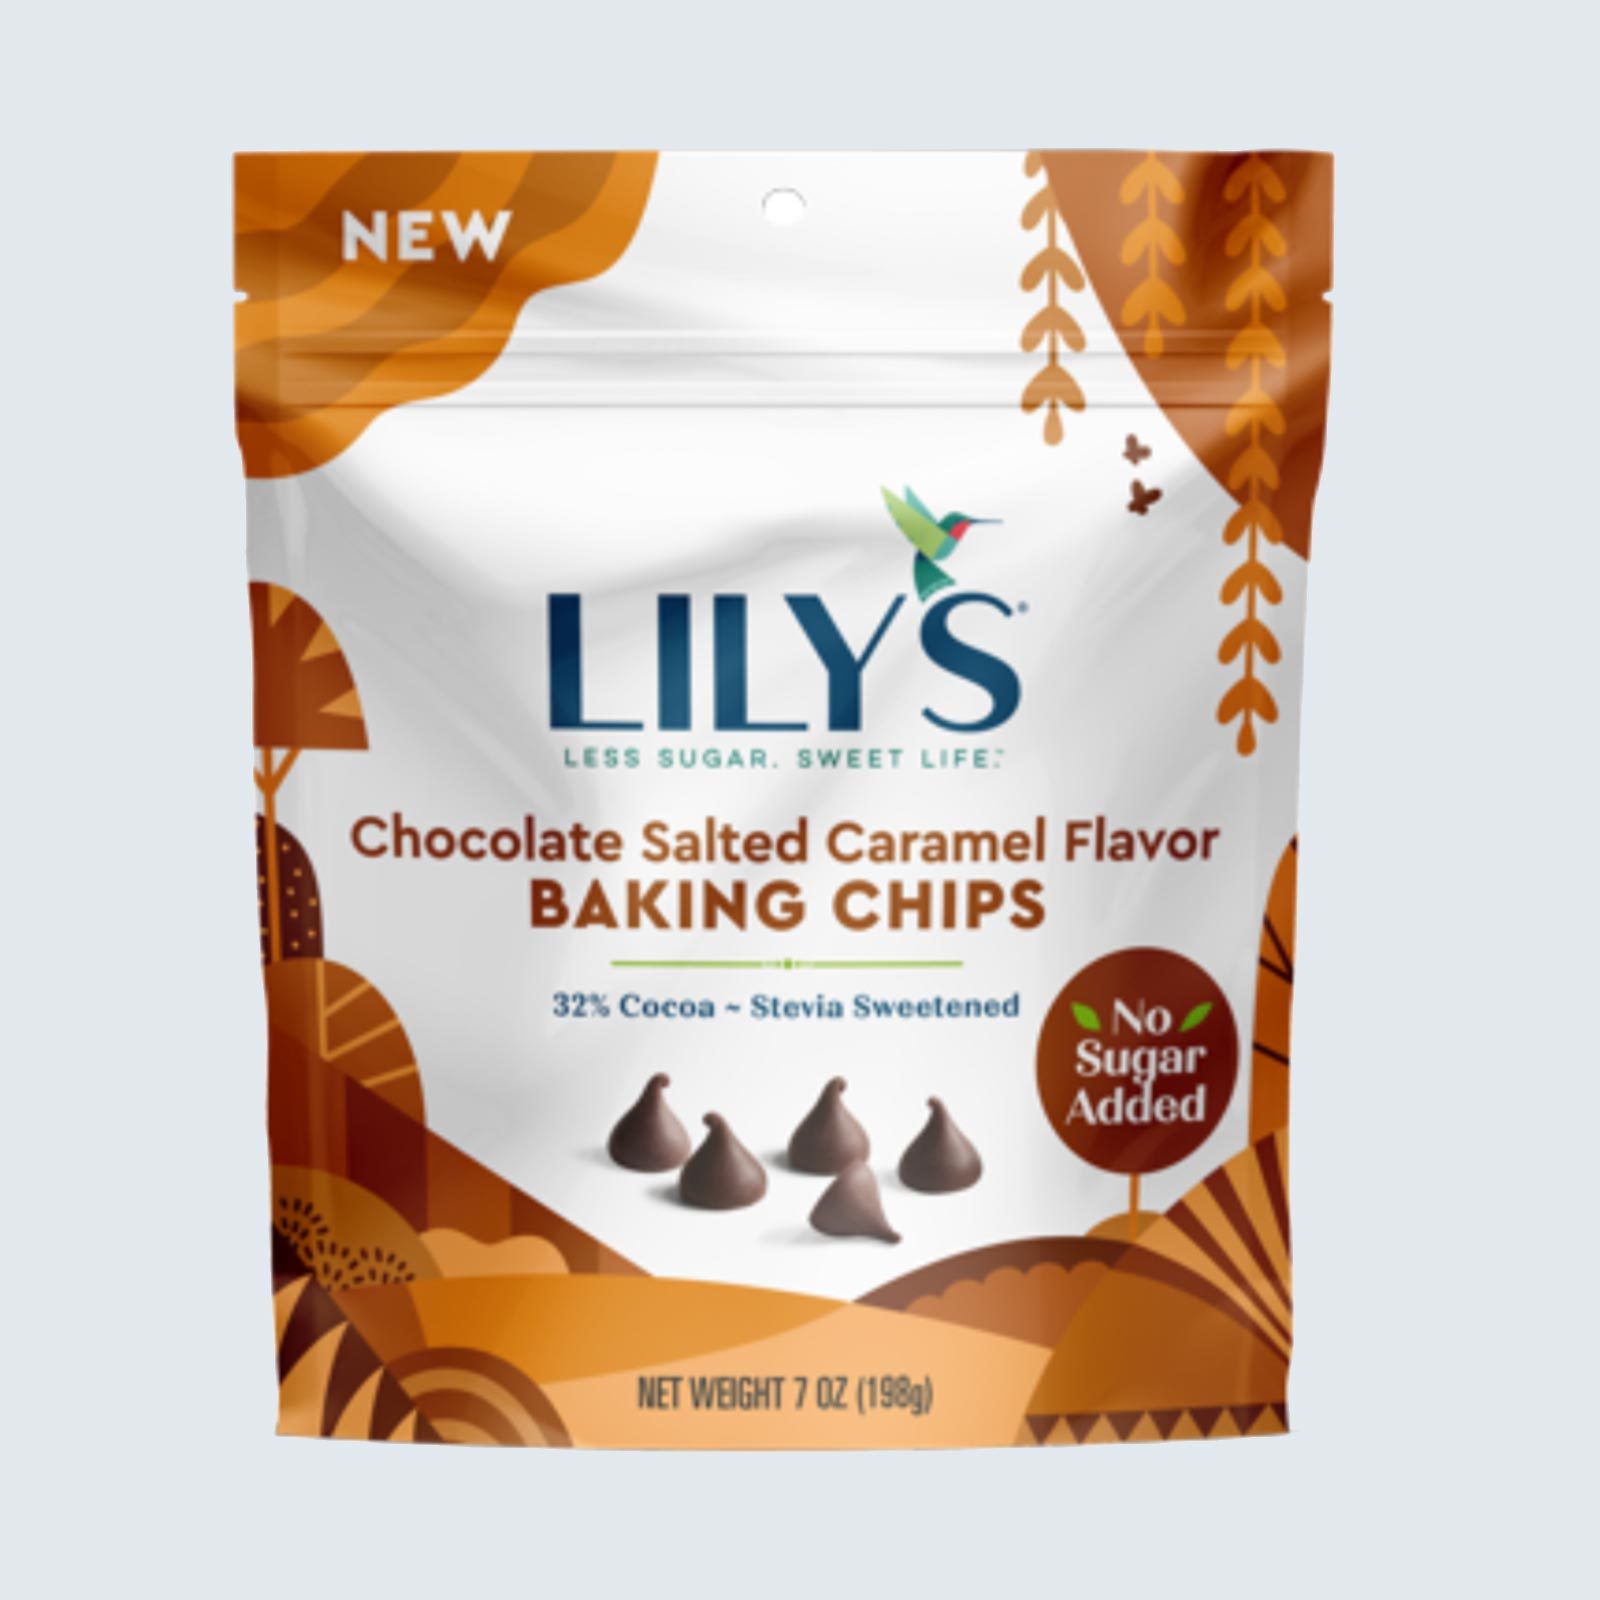 Lily's Chocolate Salted Caramel Baking Chips